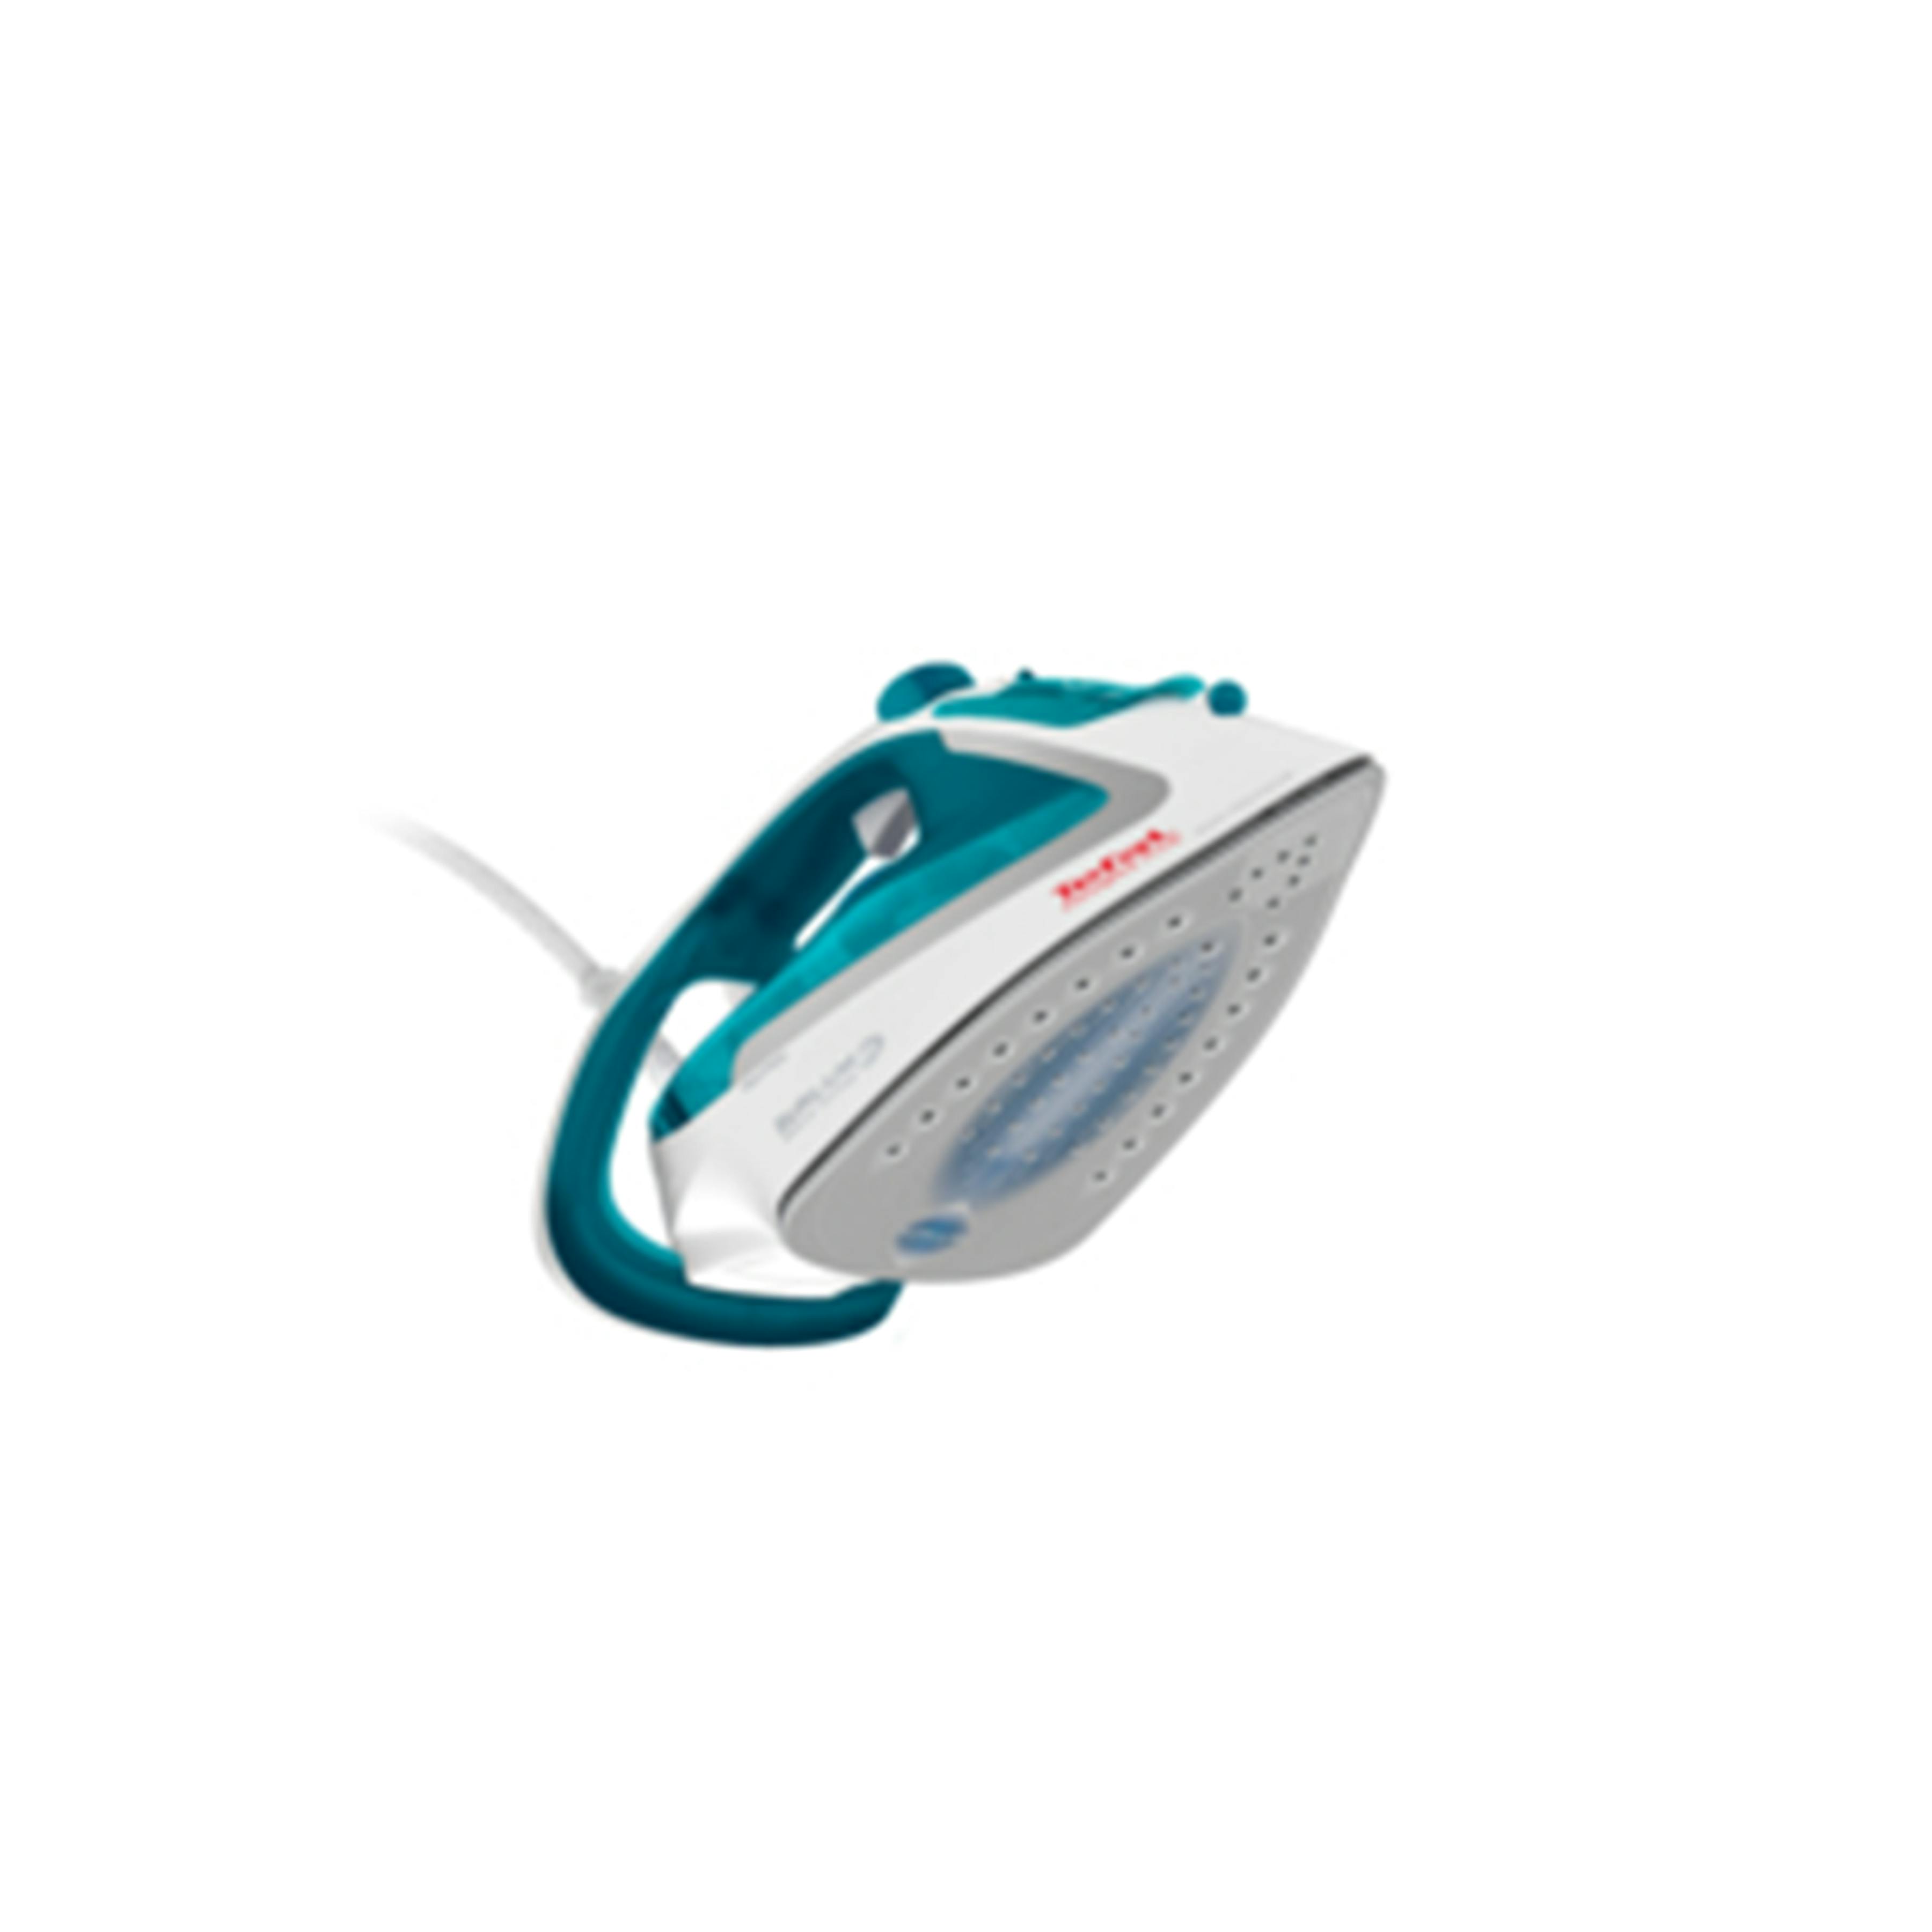 Tefal Steam Iron Easy Gliss 2 Turquoise FV5718, Tefal